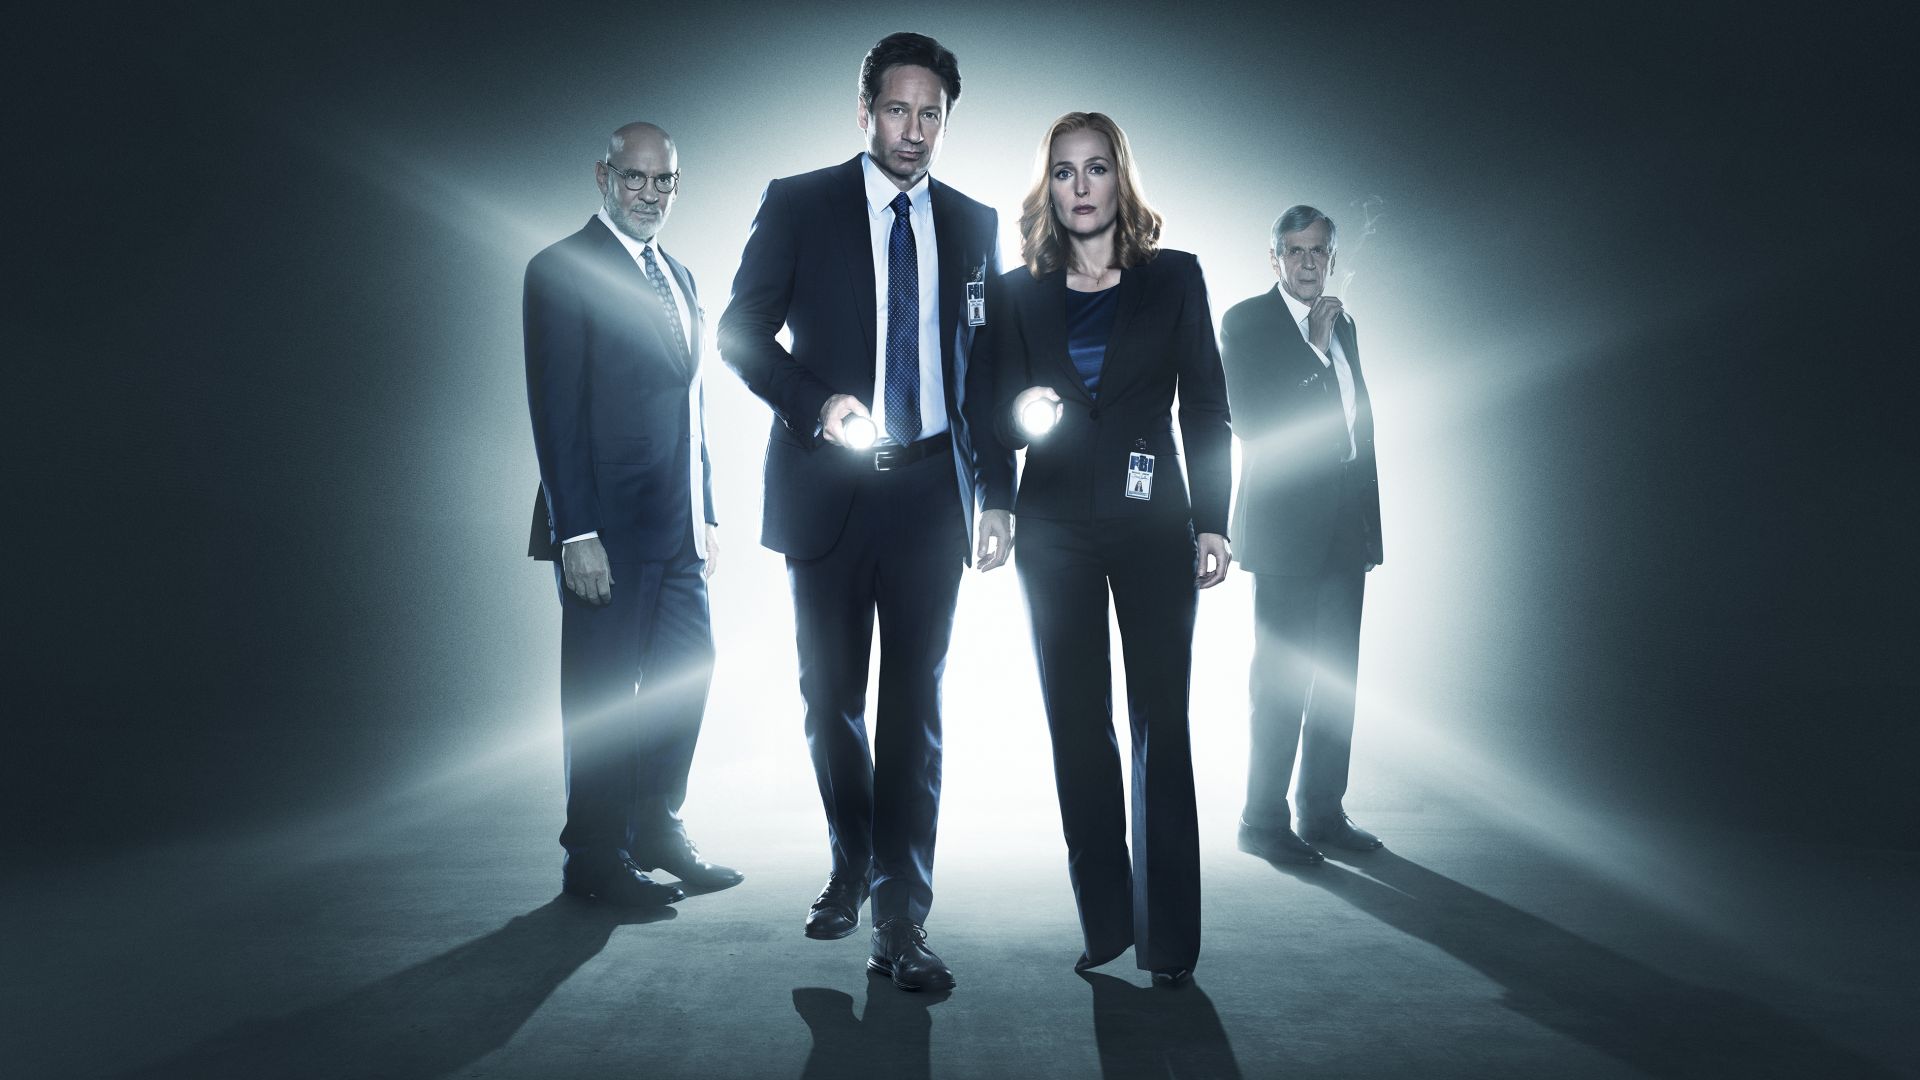 The X-Files, David Duchovny, Best TV series, detective (horizontal)